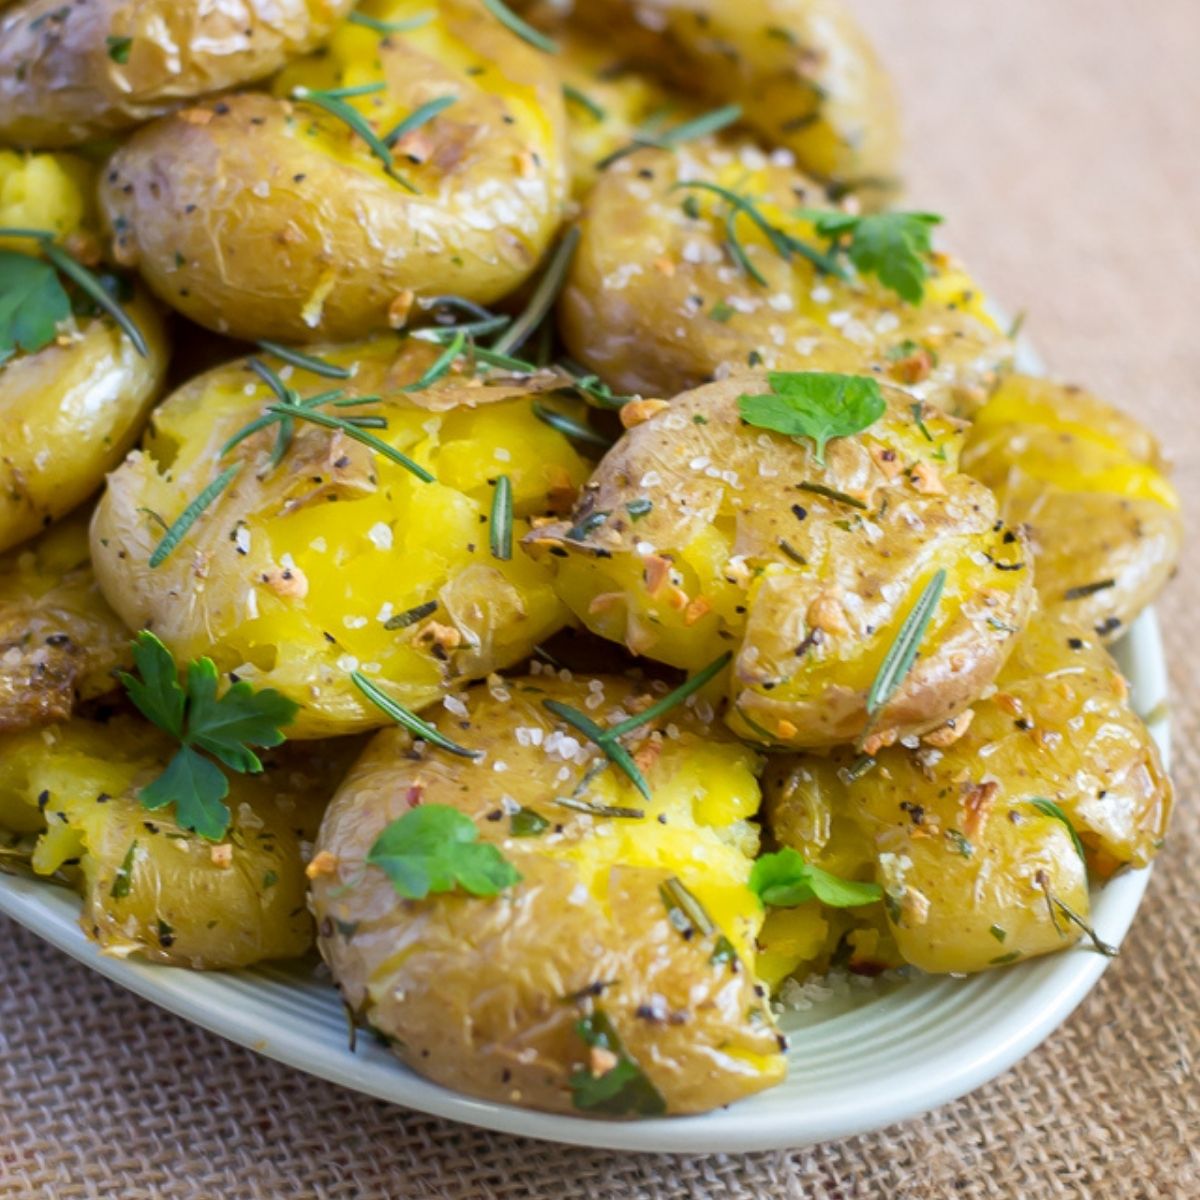 A pile of garlic rosemary smashed potatoes on a serving platter.